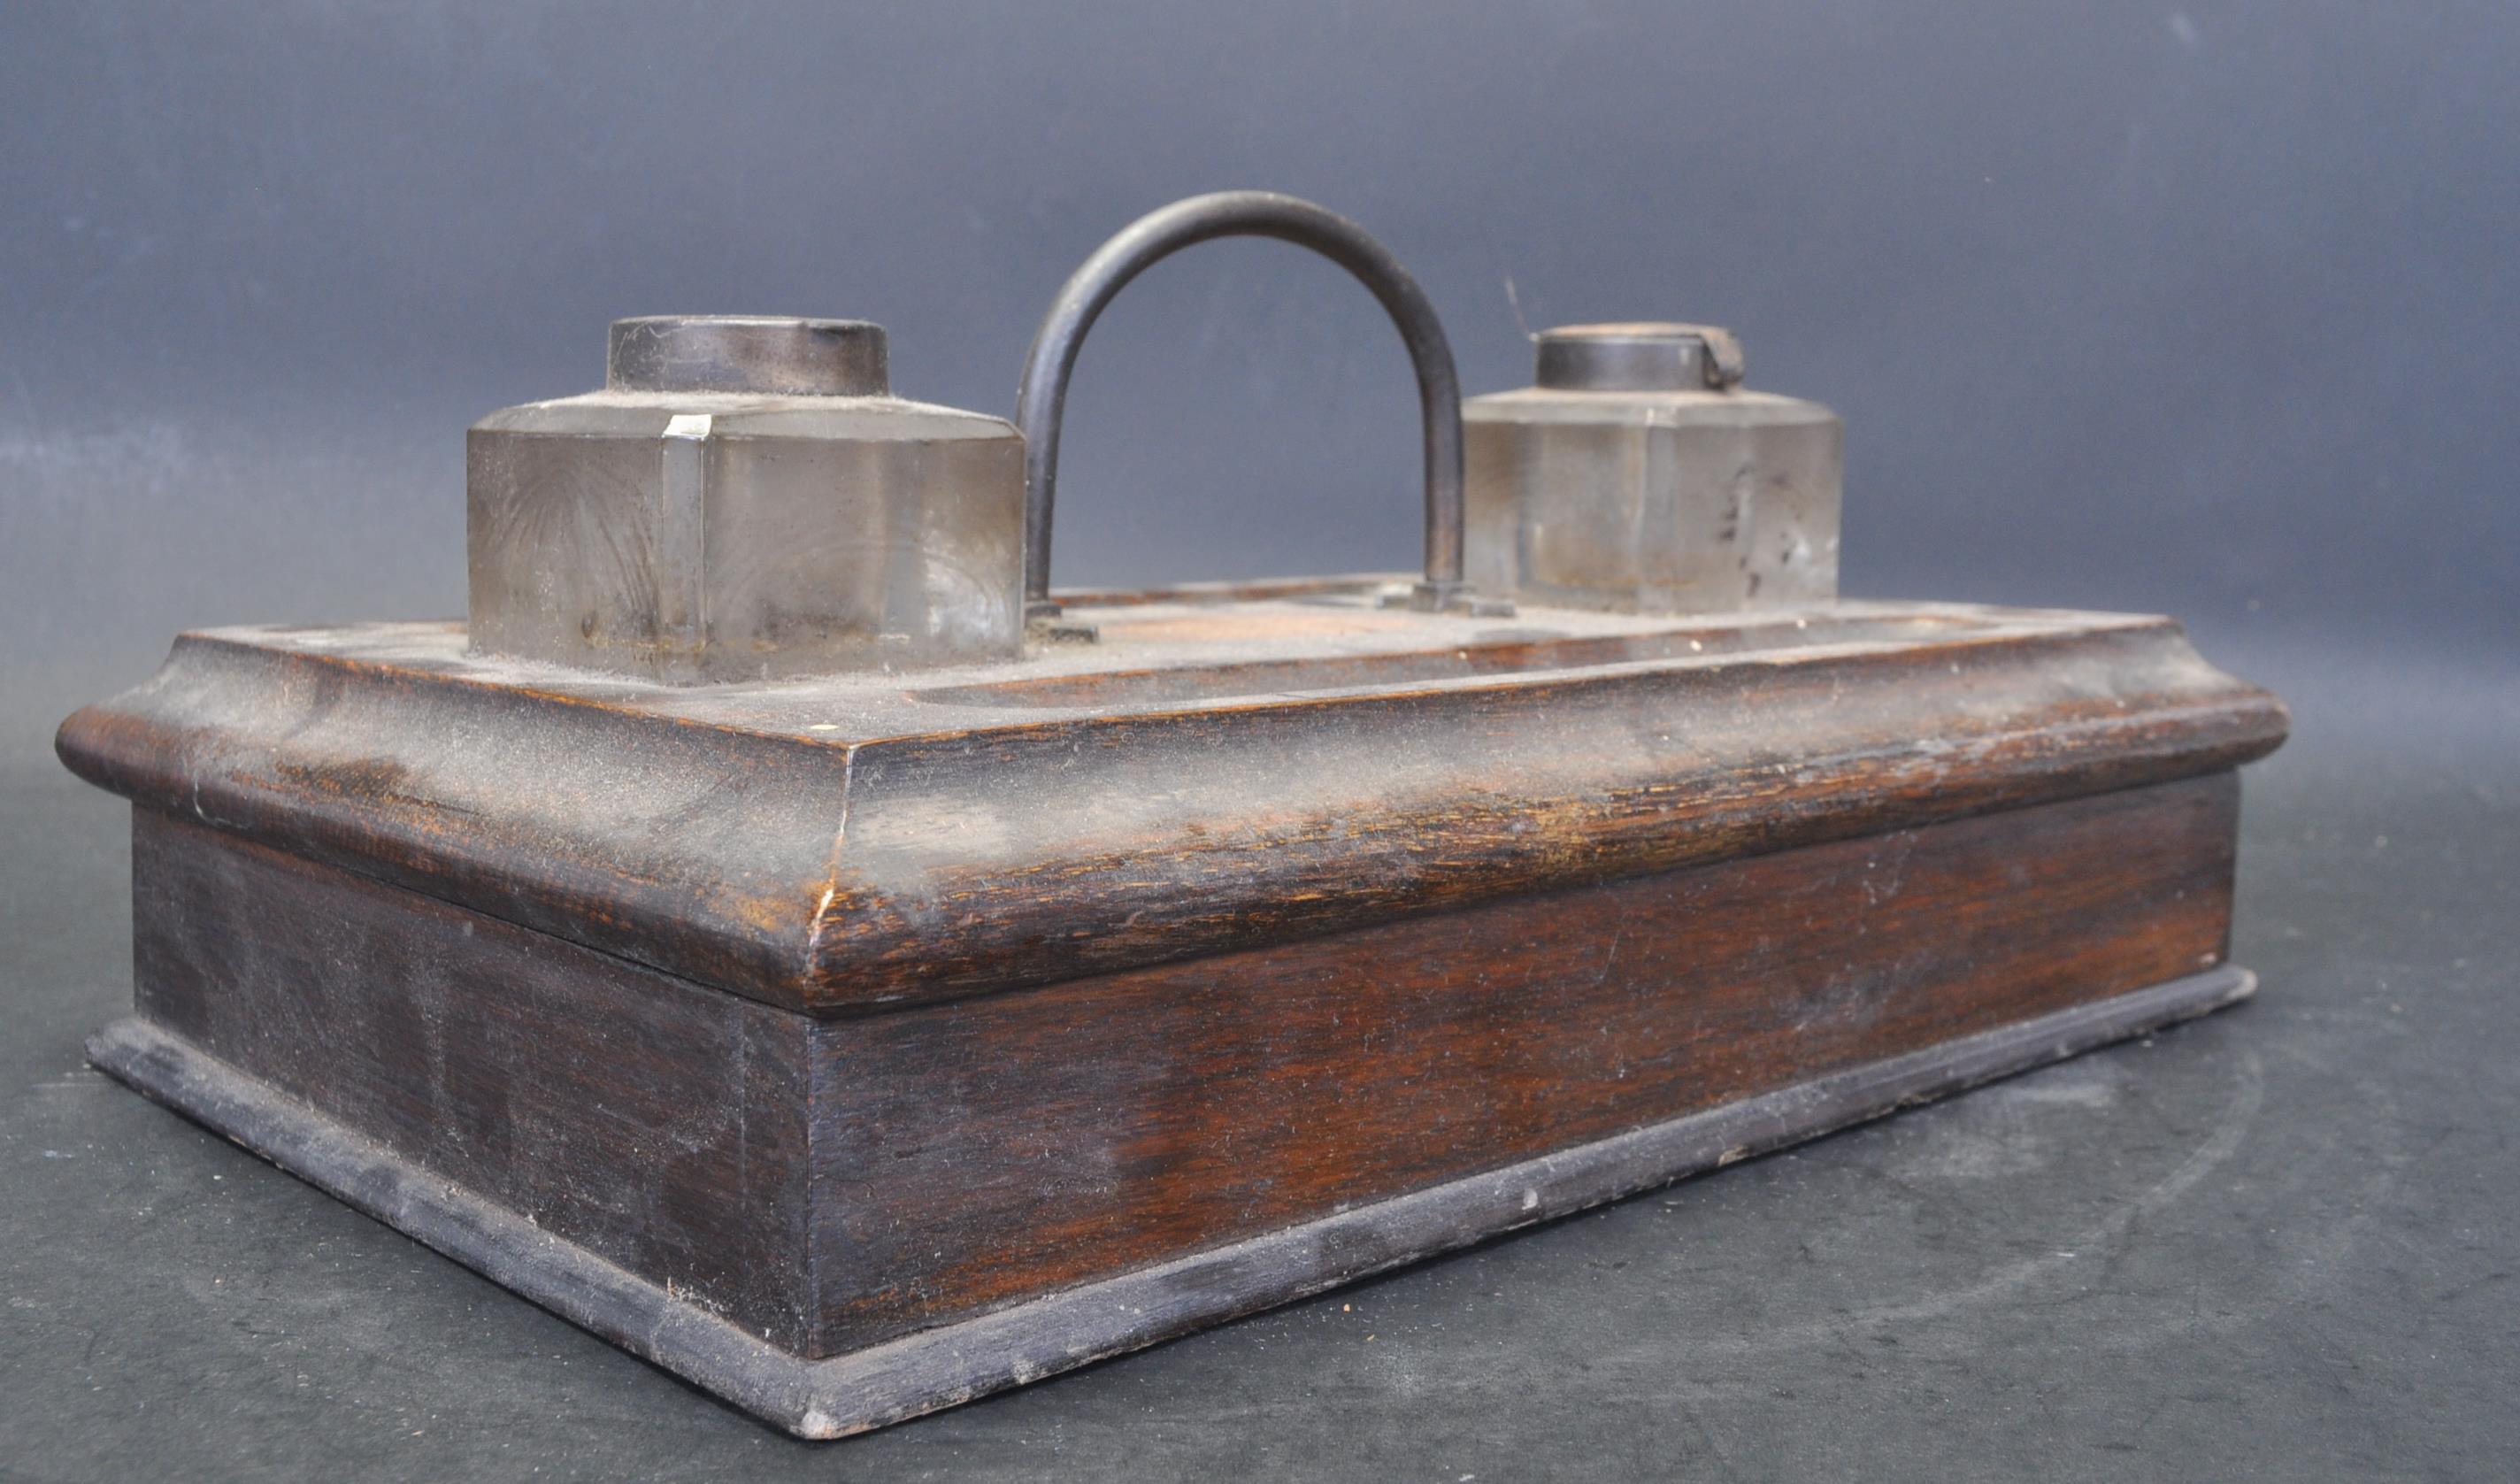 EARLY 20TH CENTURY EDWARDIAN INK WELL / DESK TIDY - Image 5 of 6